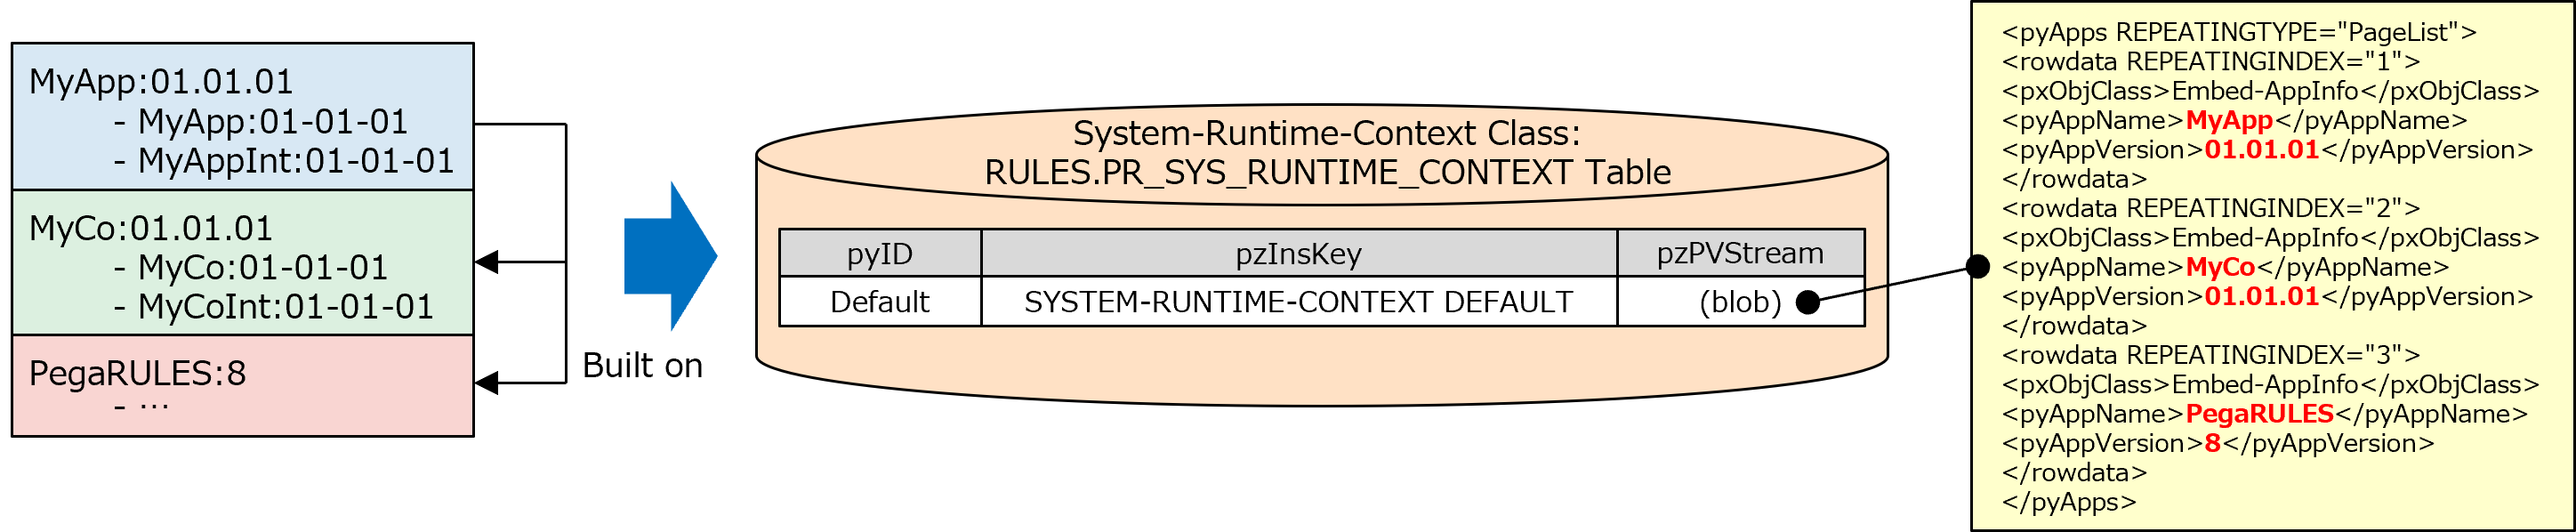 PR_SYS_RUNTIME_CONTEXT